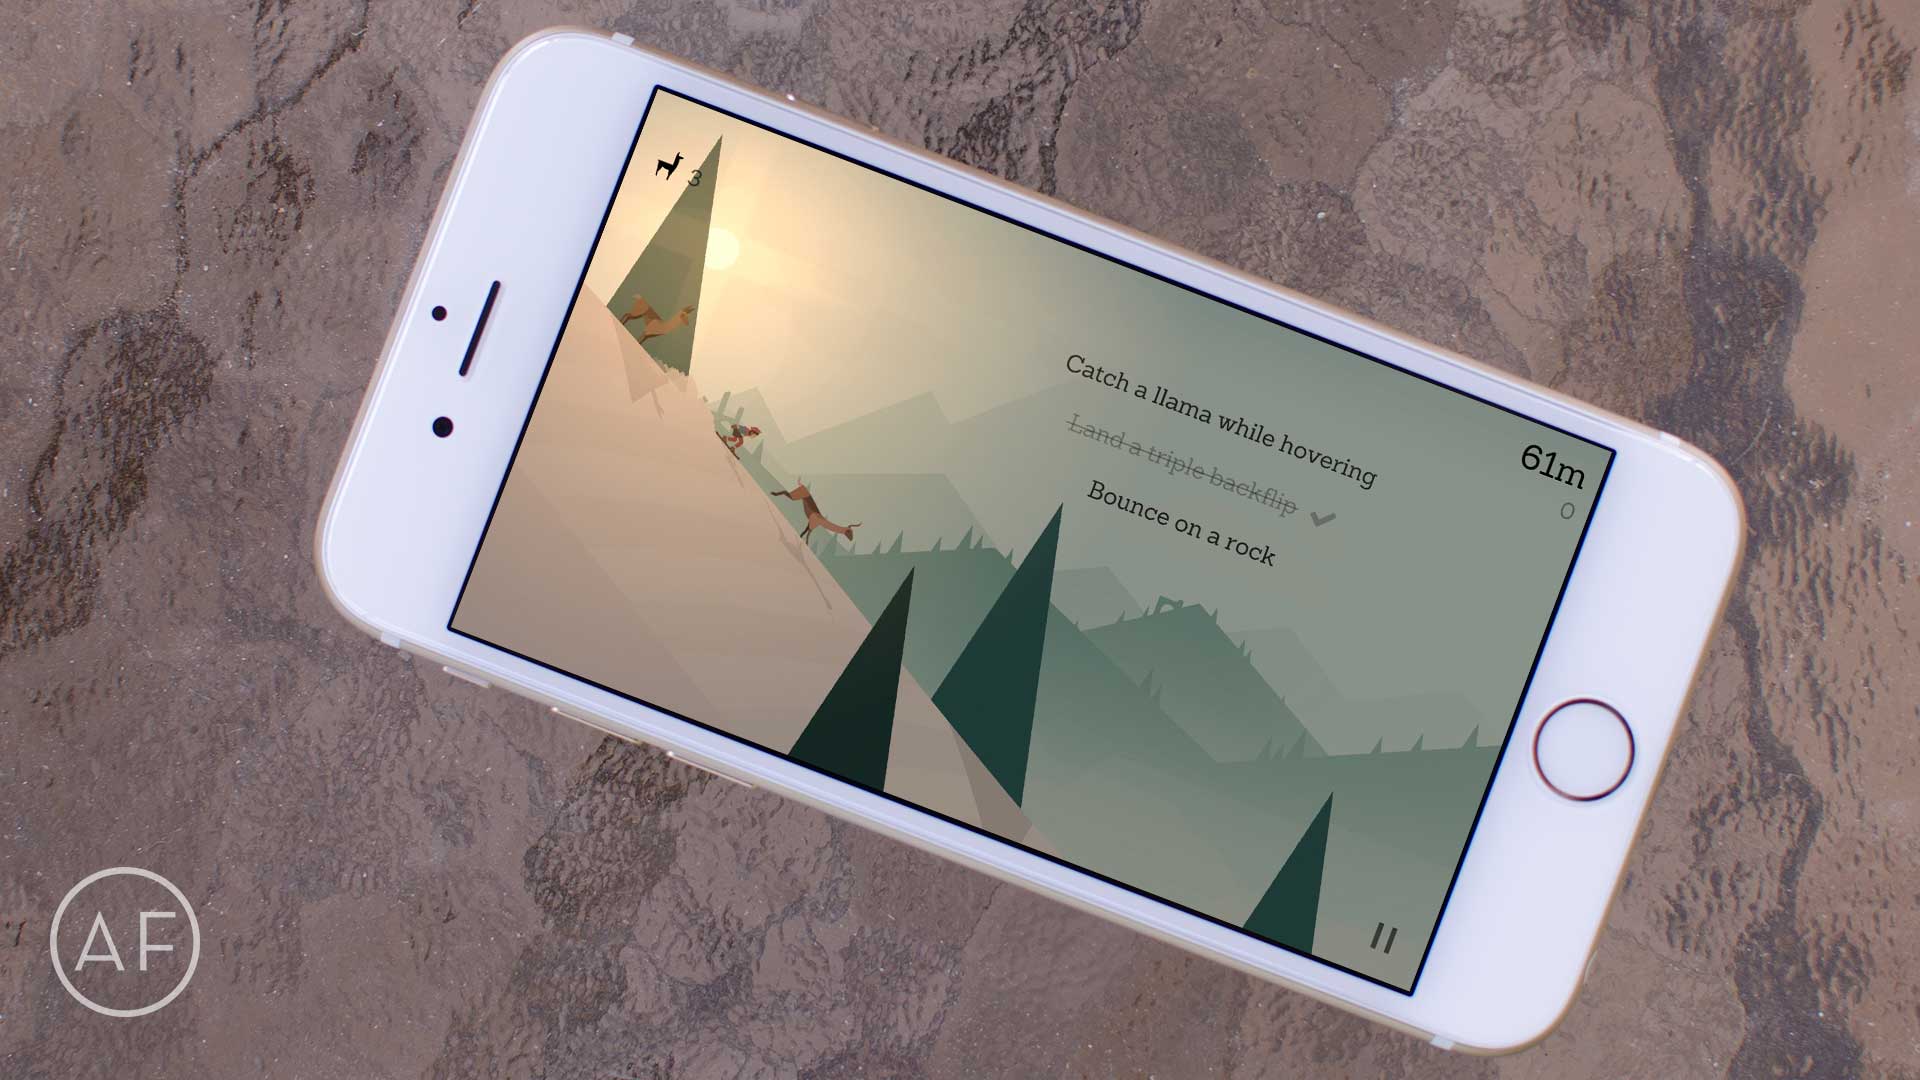 Here are 12 awesome iOS games, old and new, we think are definitely worth a try!